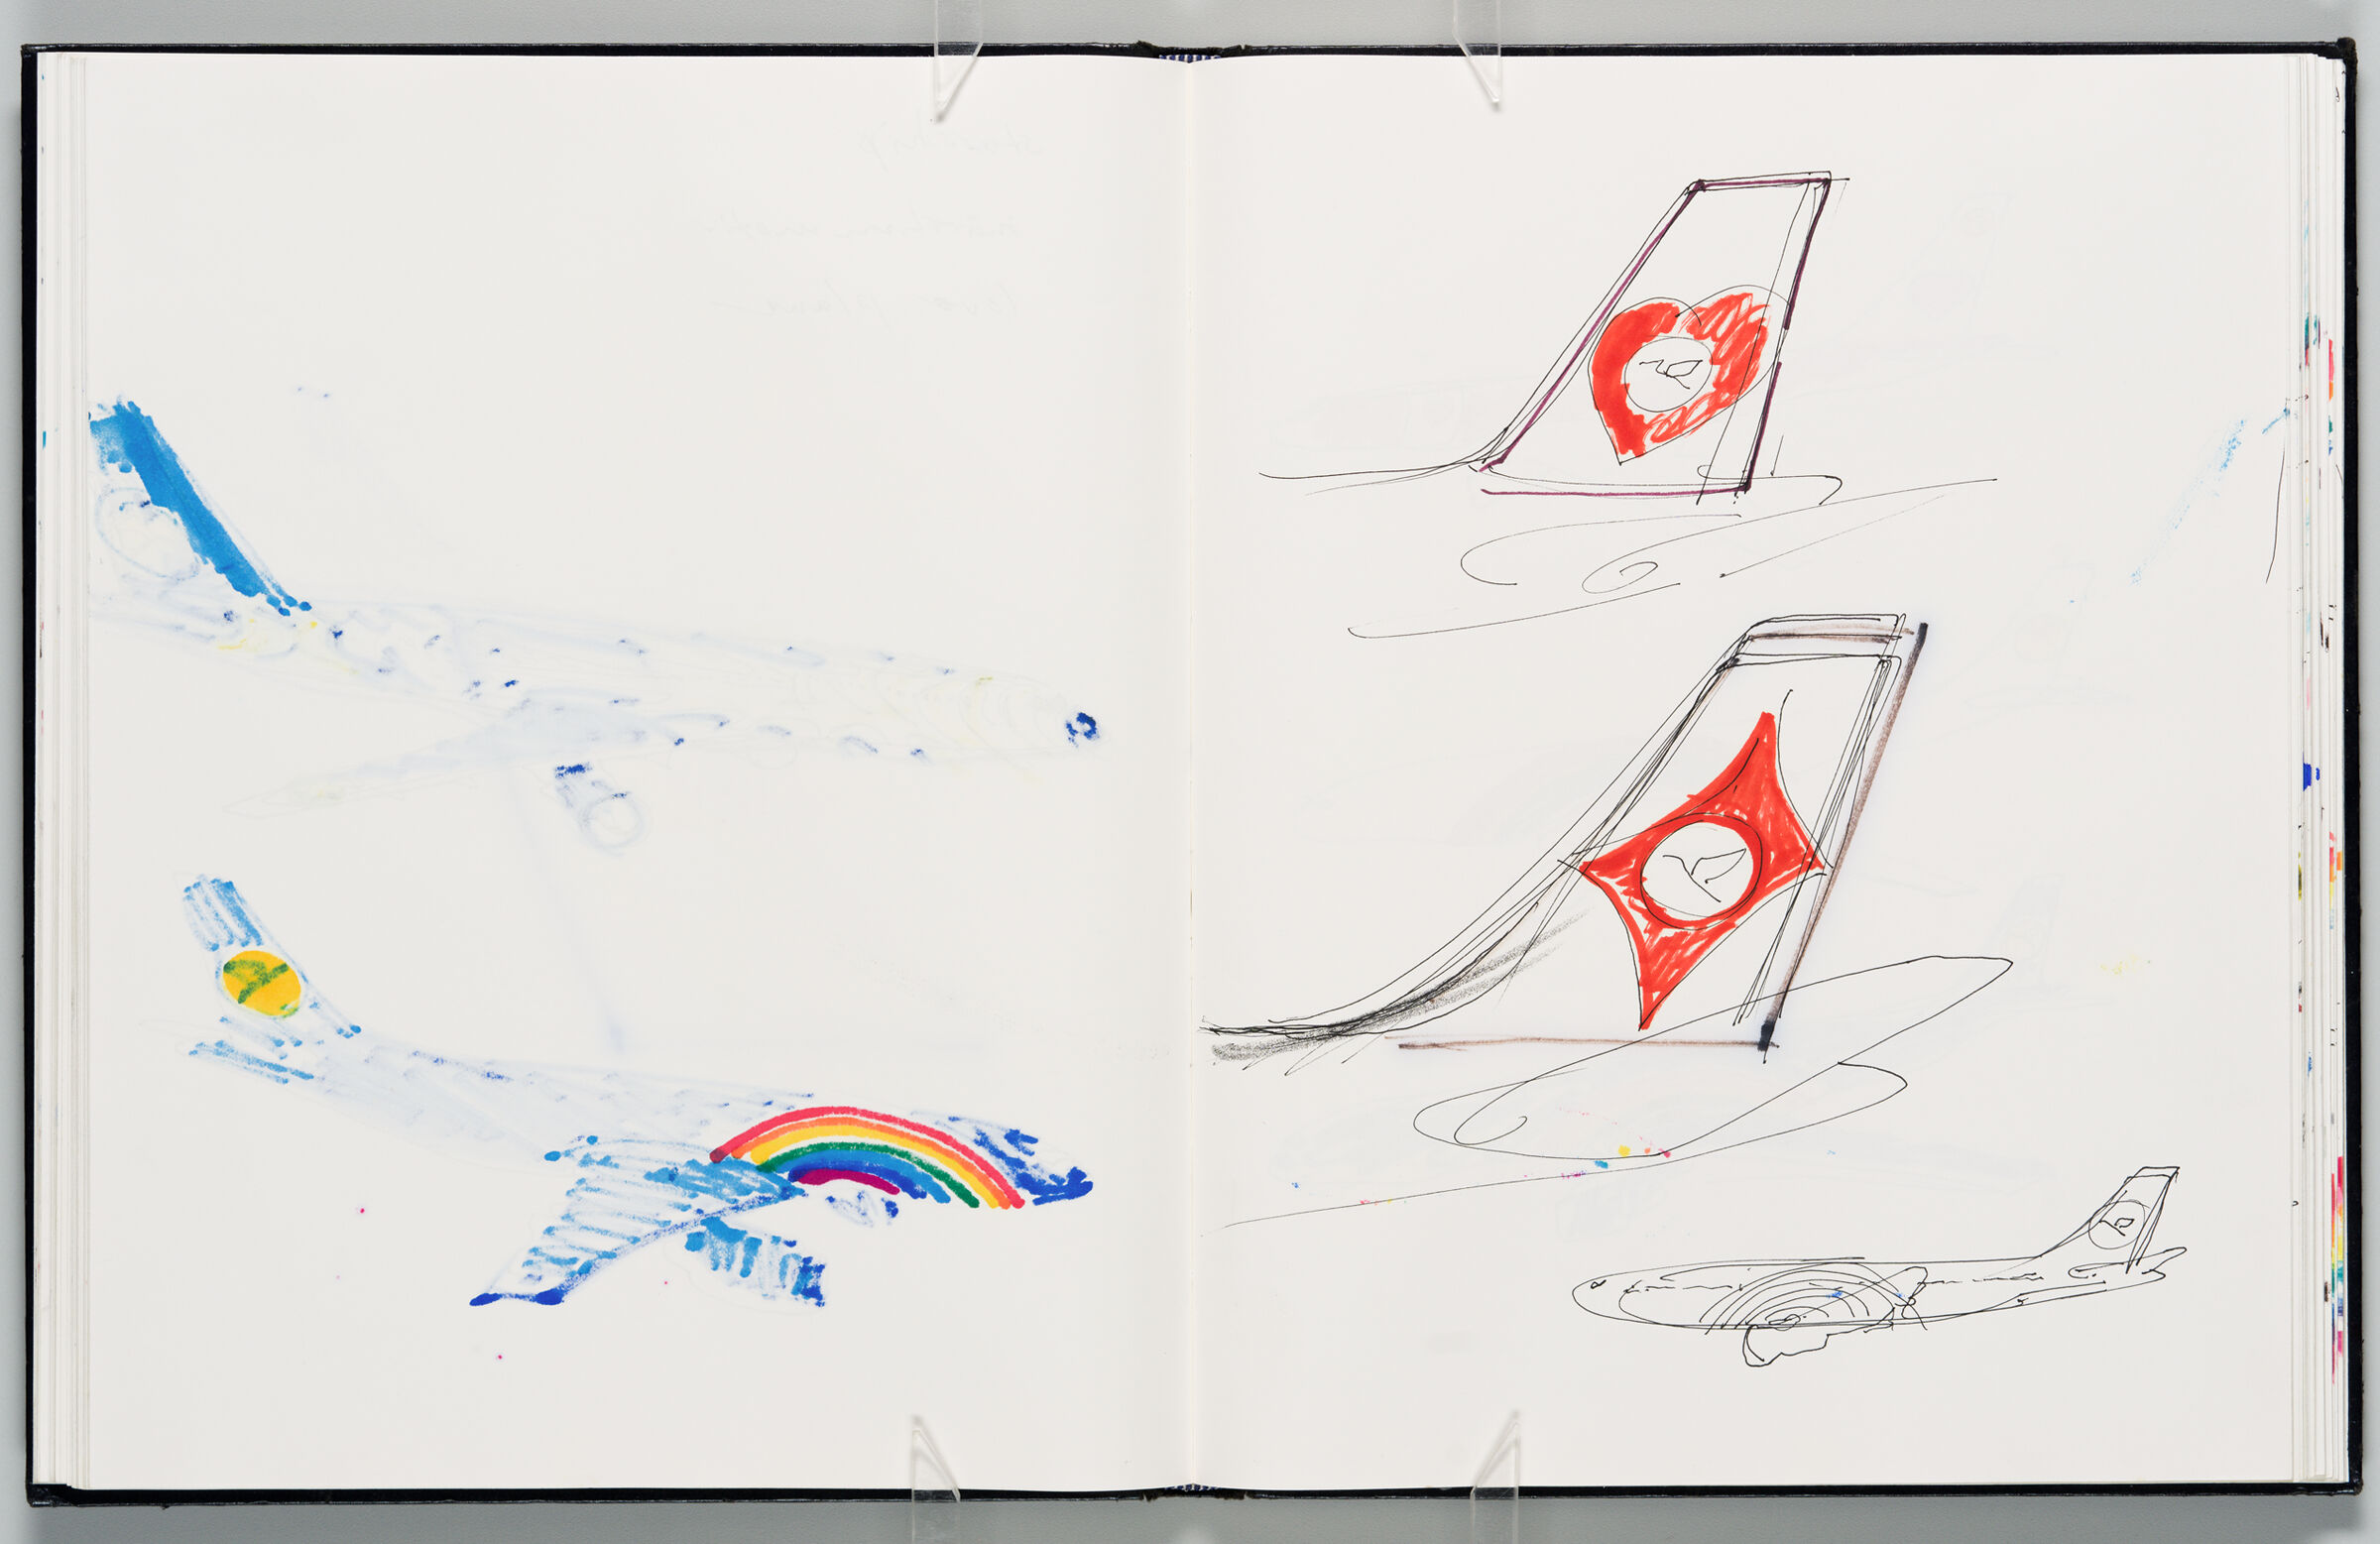 Untitled (Bleed-Through Of Previous Page, Left Page); Untitled (Designs For Condor Planes, Right Page)